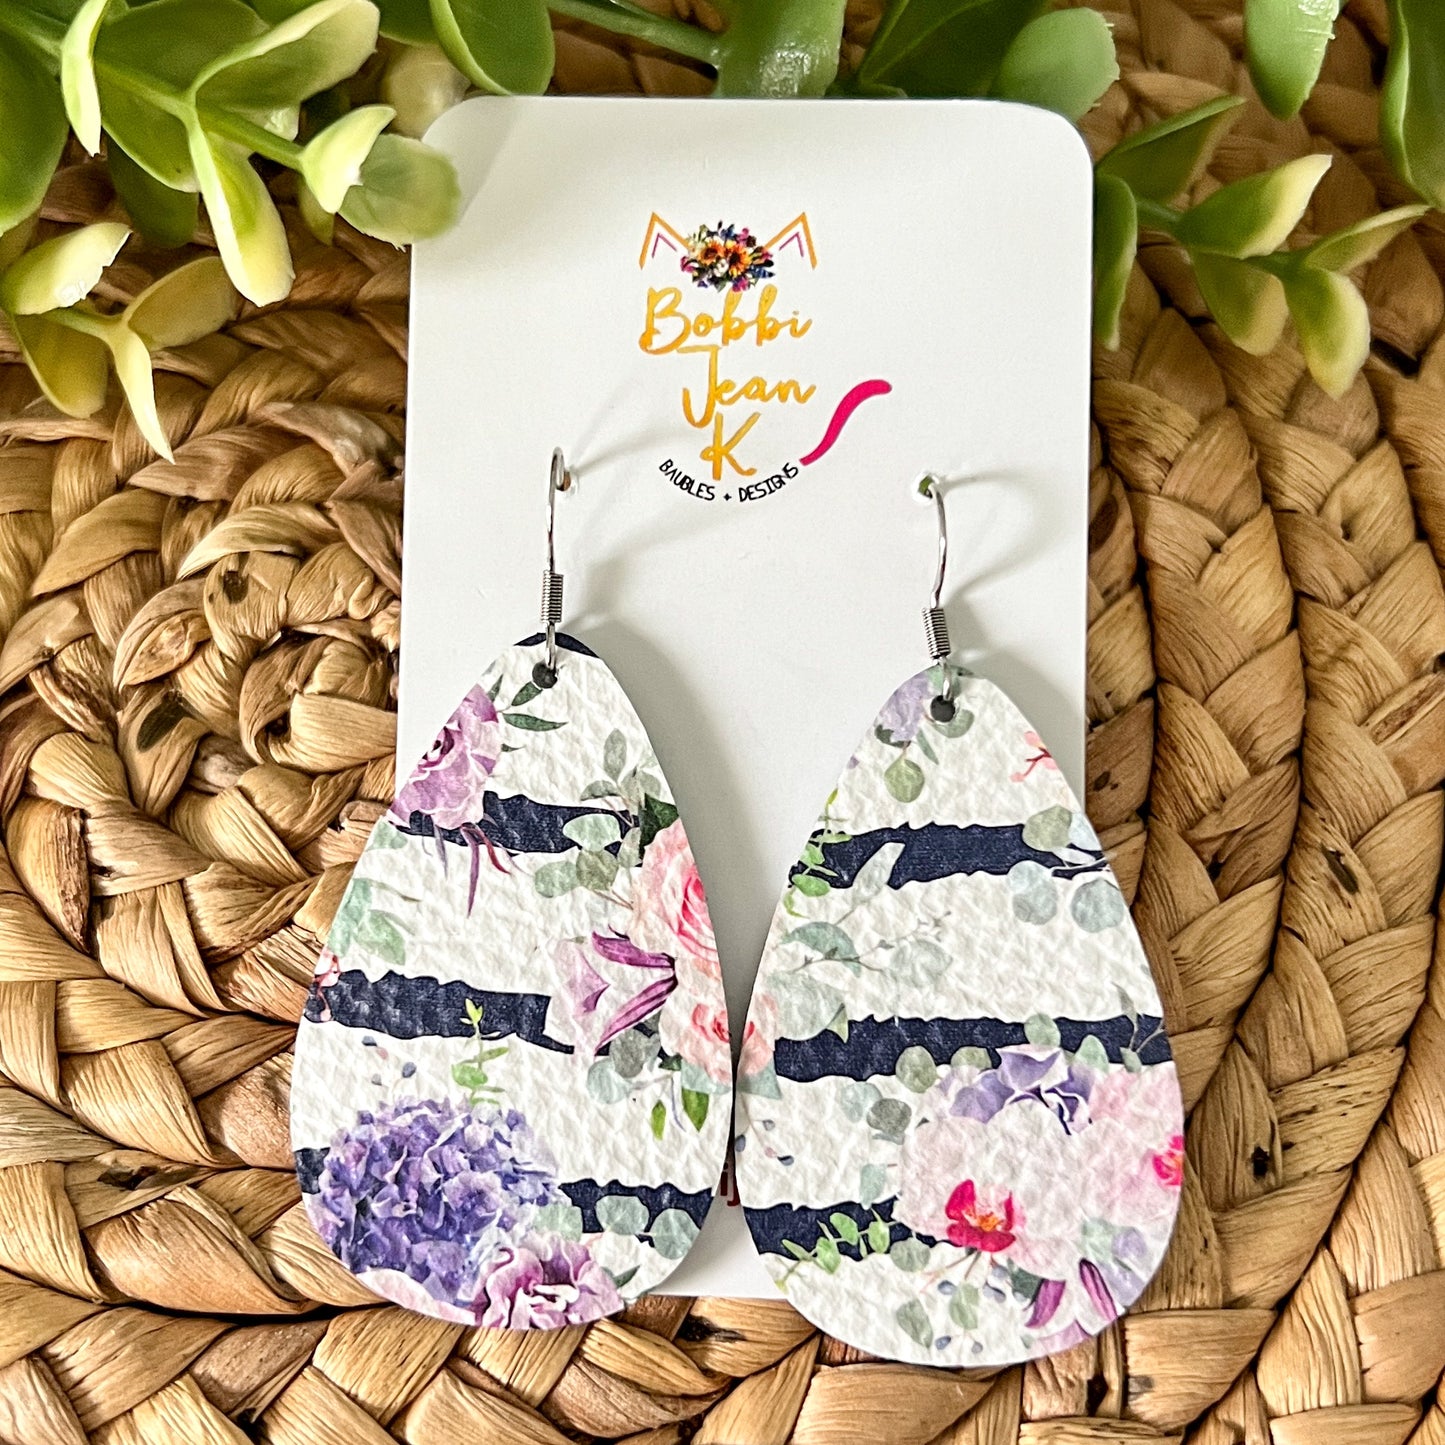 Navy Striped Floral Leather Earrings: Choose From 2 Styles